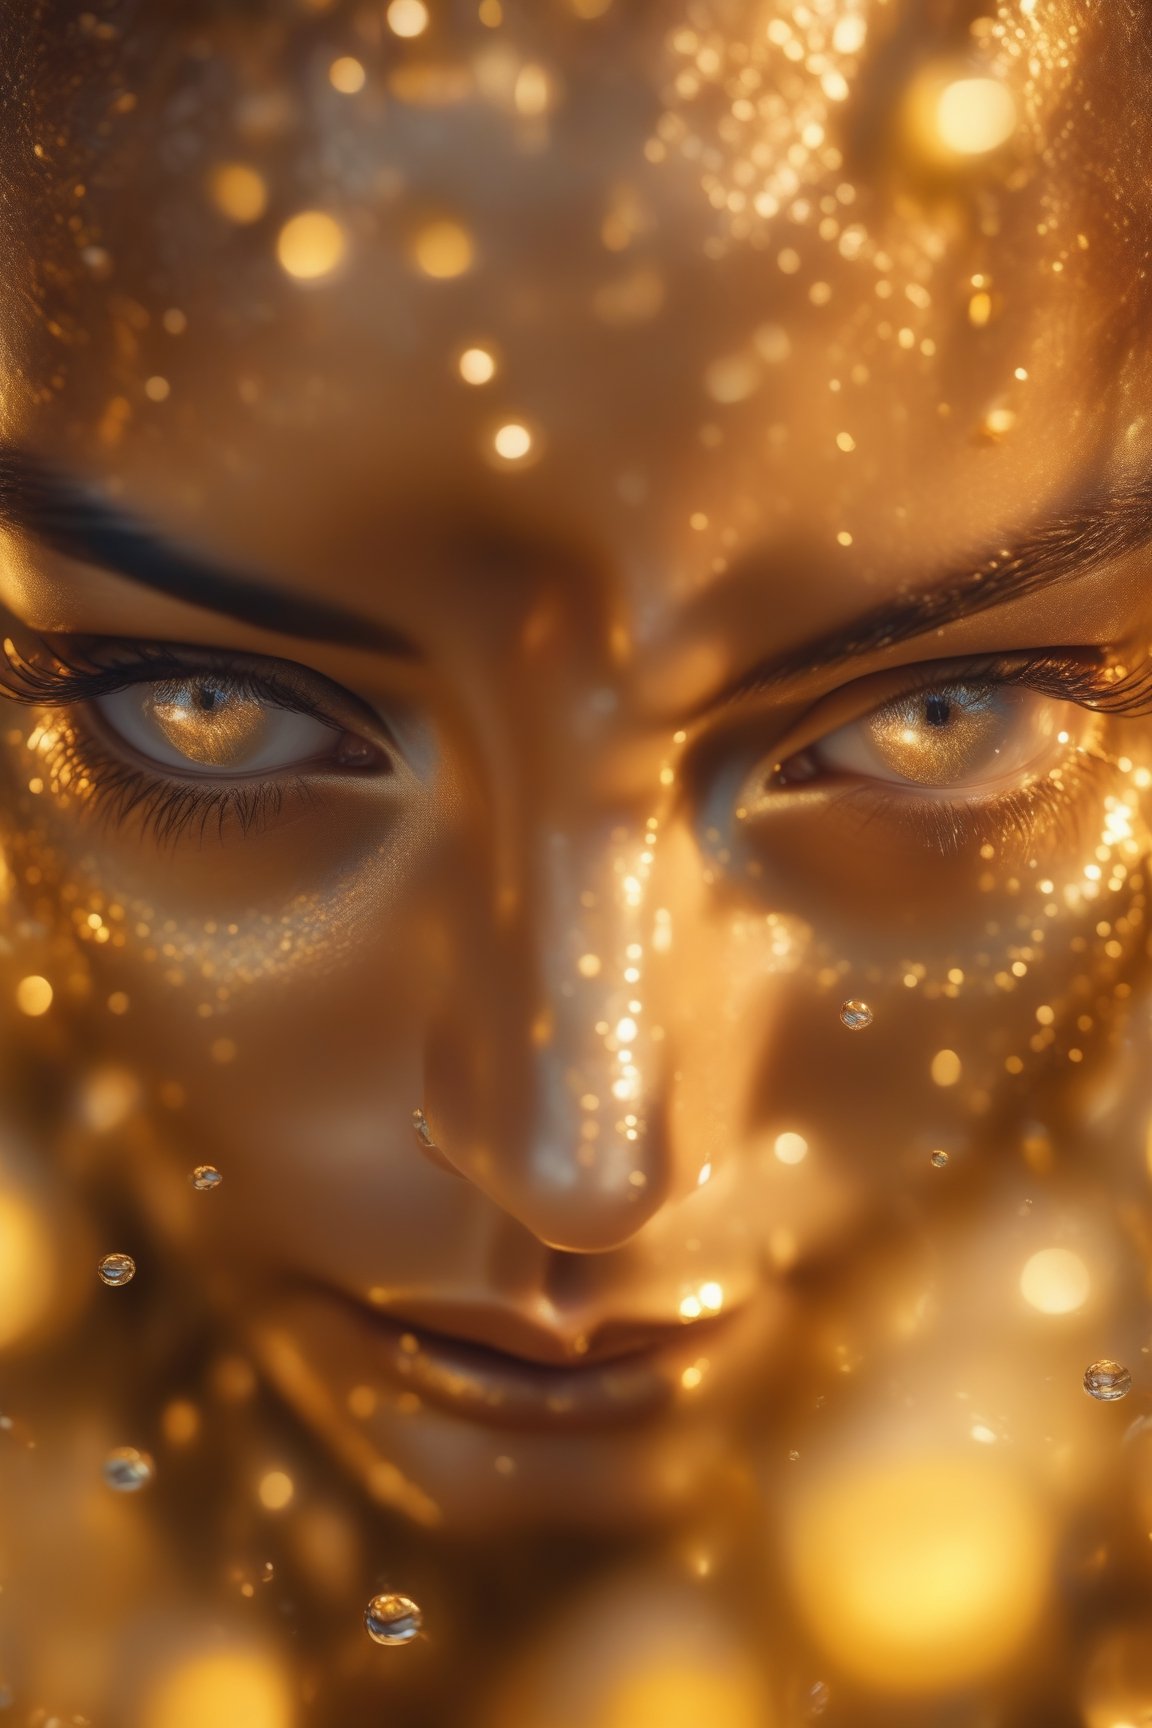 Poster, Macro shot, A captivating close-up of a (delicate, intricately detailed woman:0.8) surrounded by a (shimmering sea of gold and light:1.6), with (droplets of water:1.4) reflecting the colors around her, creating a (mesmerizing visual experience:0.7).

